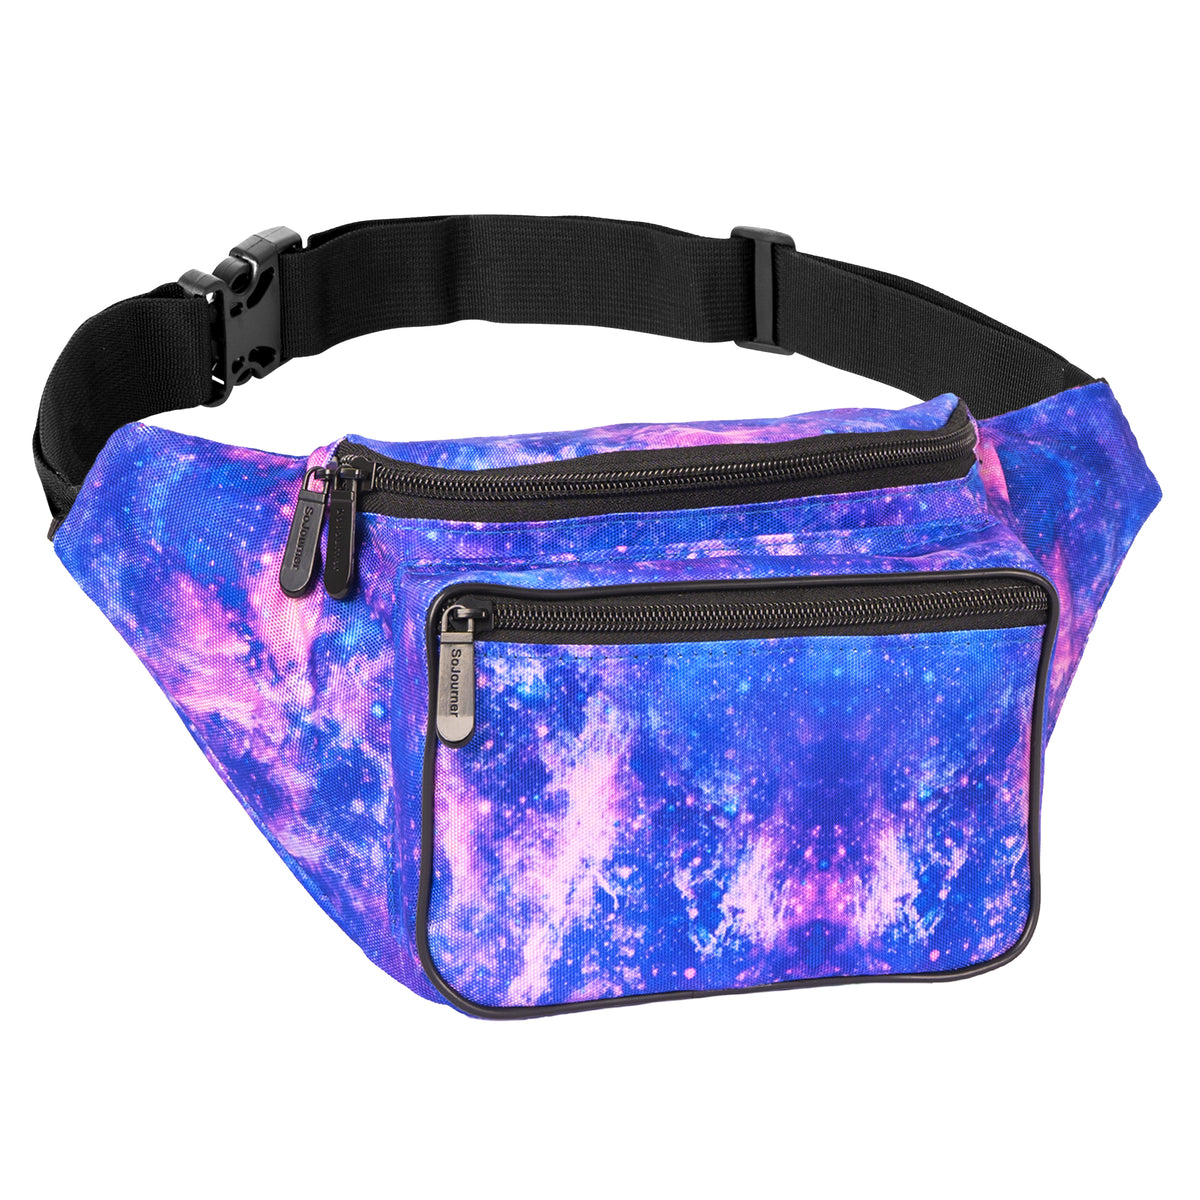 Outter Space Fanny Pack